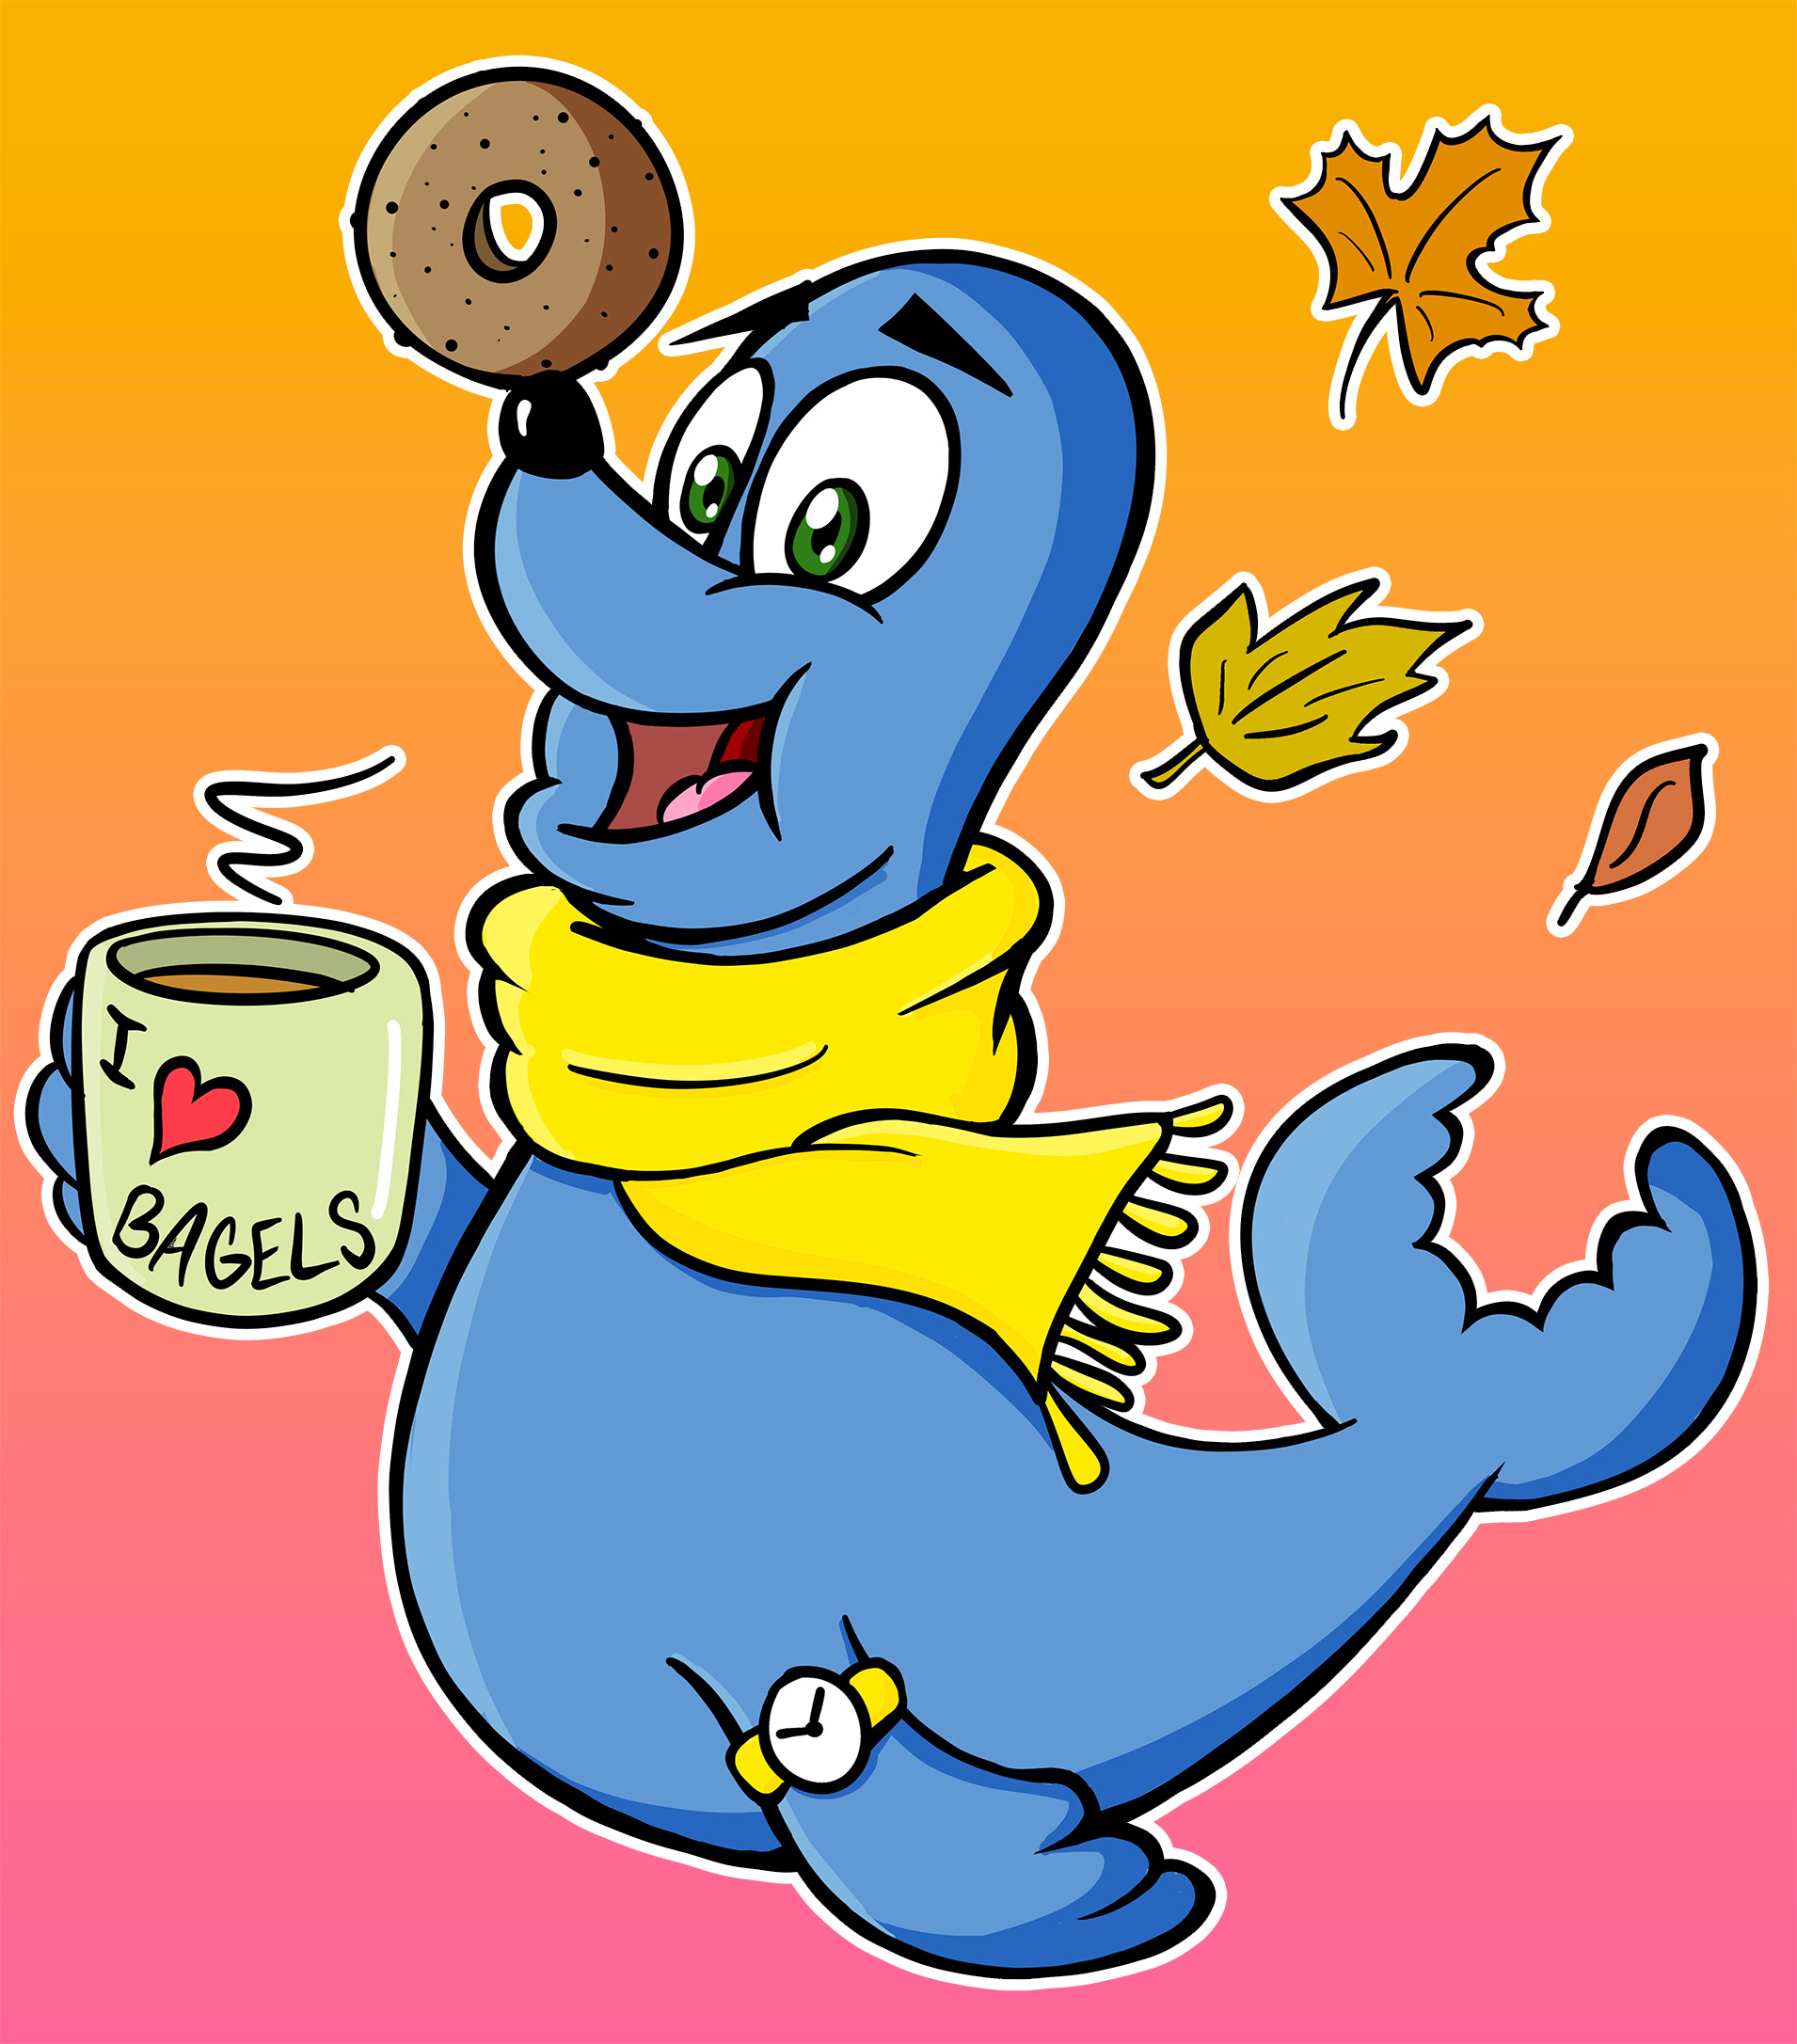 Blue Seal Bagels - Autumn Buster